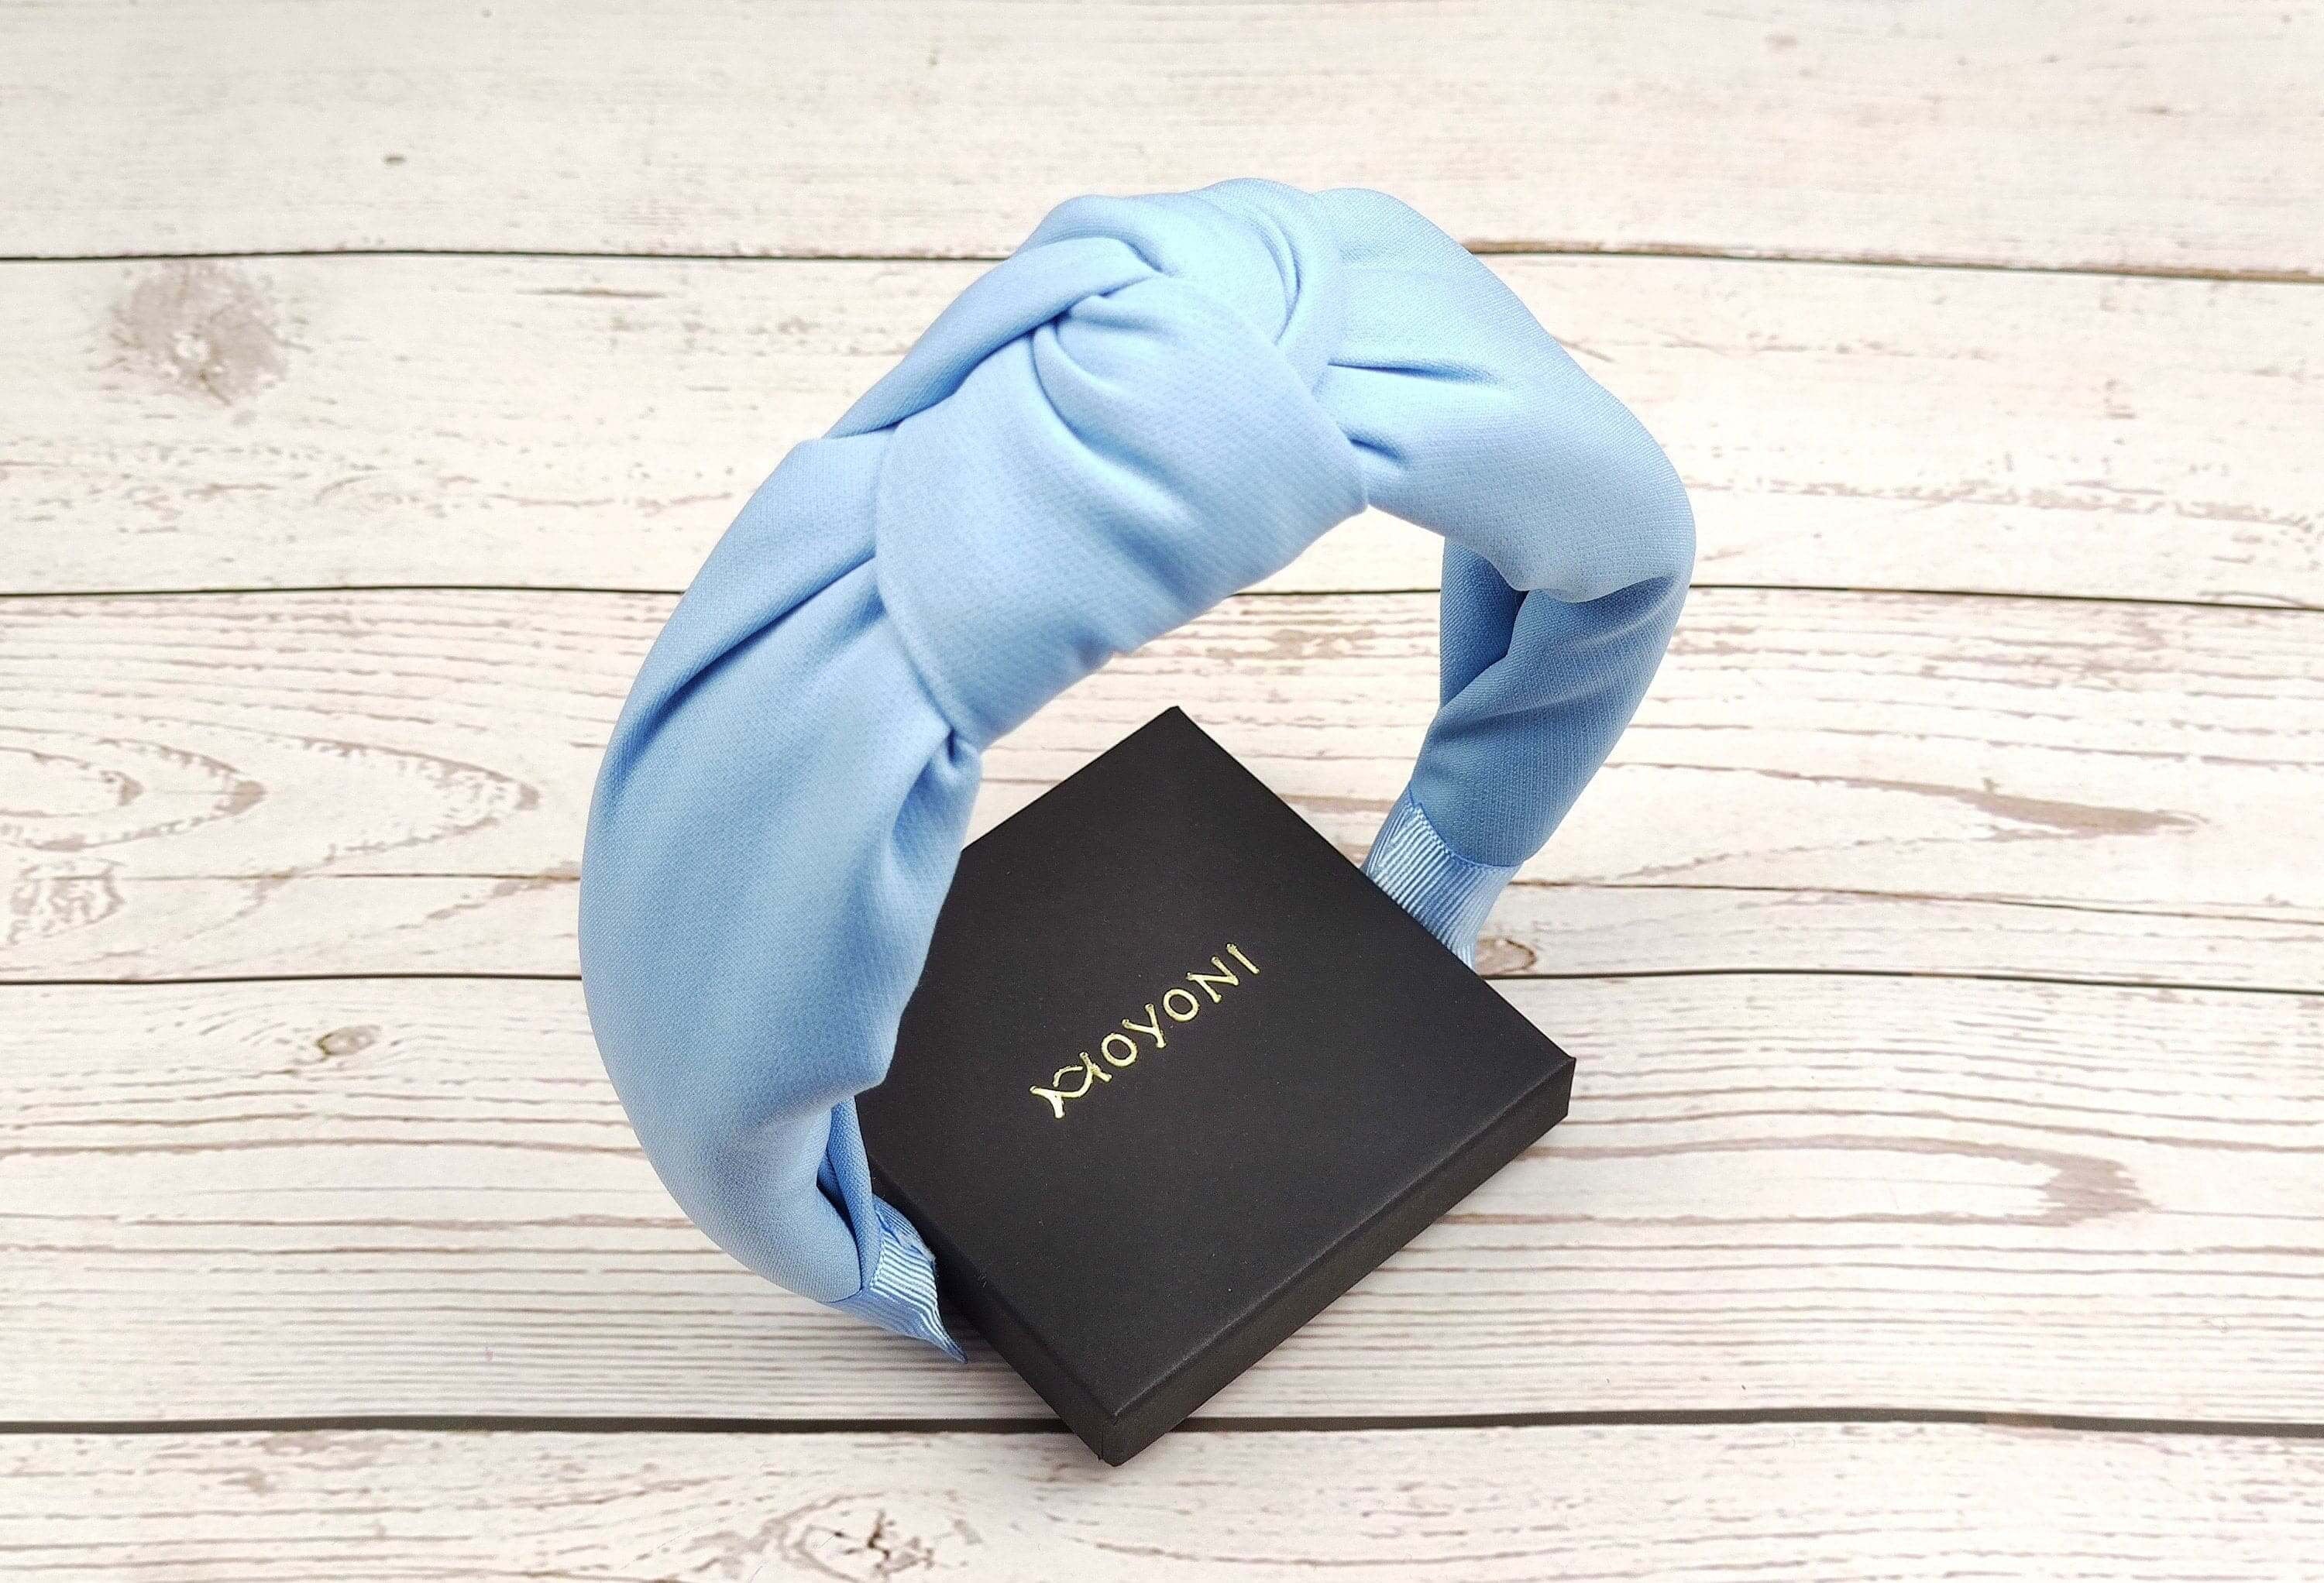 Make a statement with this fashionable and versatile light blue headband for women.